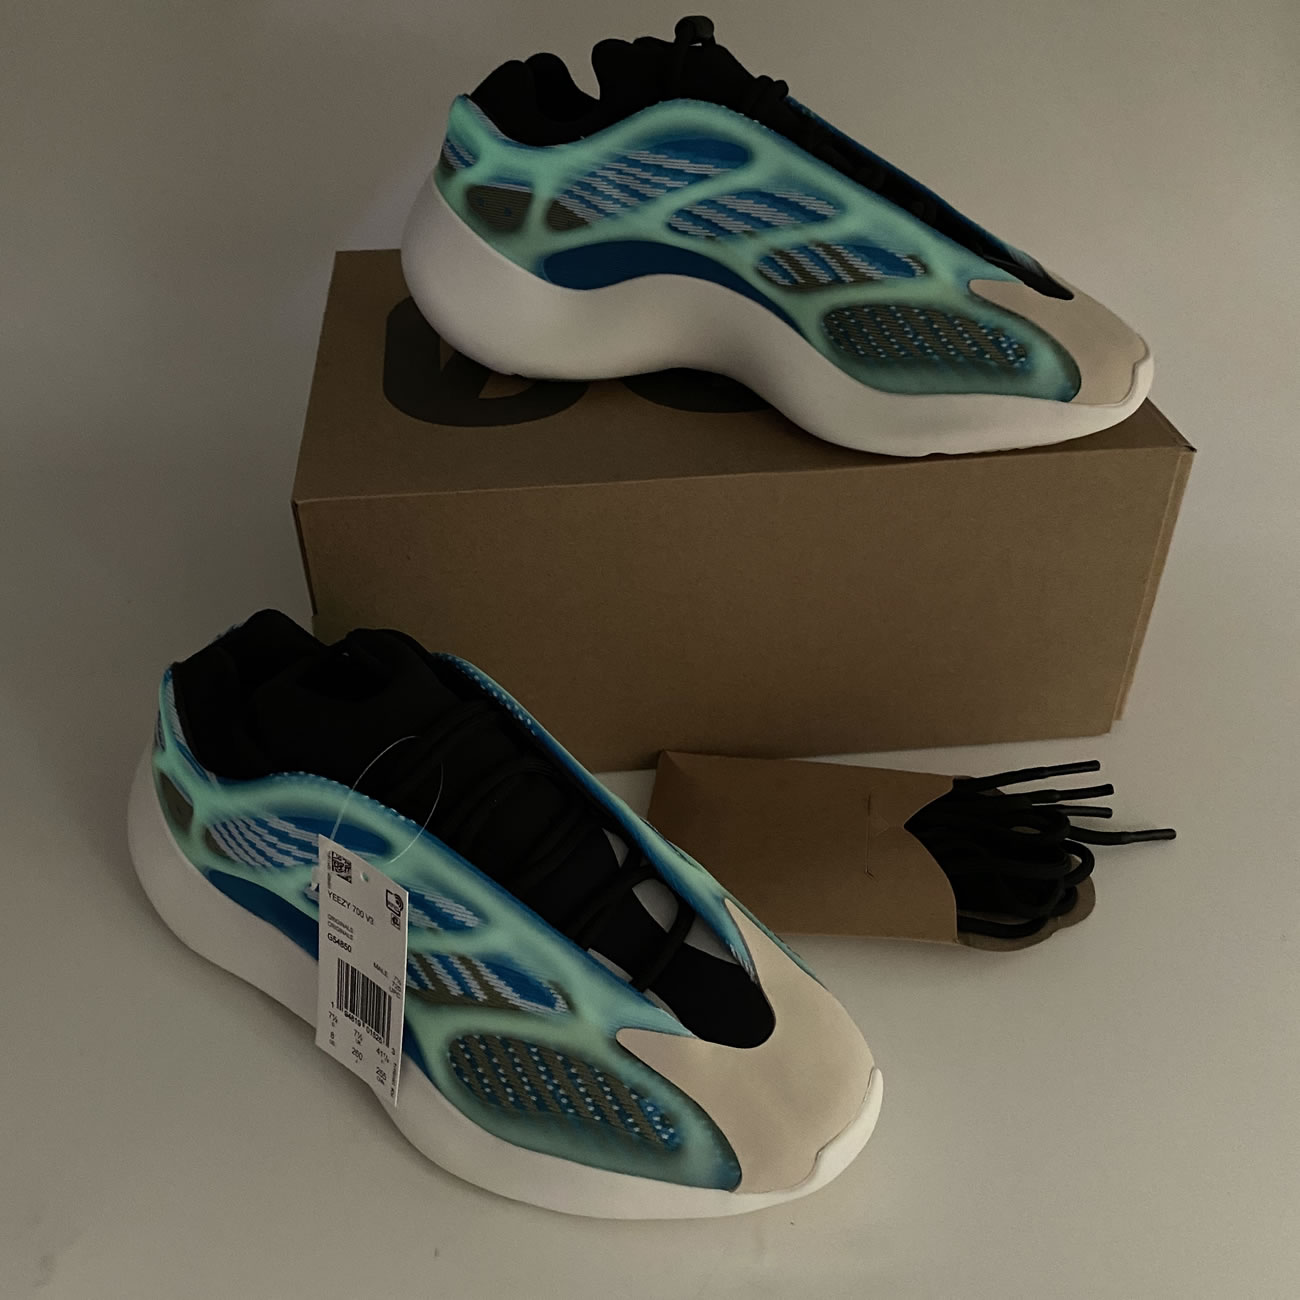 Adidas Yeezy 700 V3 Arazre G54850 New Release Date For Sale (11) - newkick.org